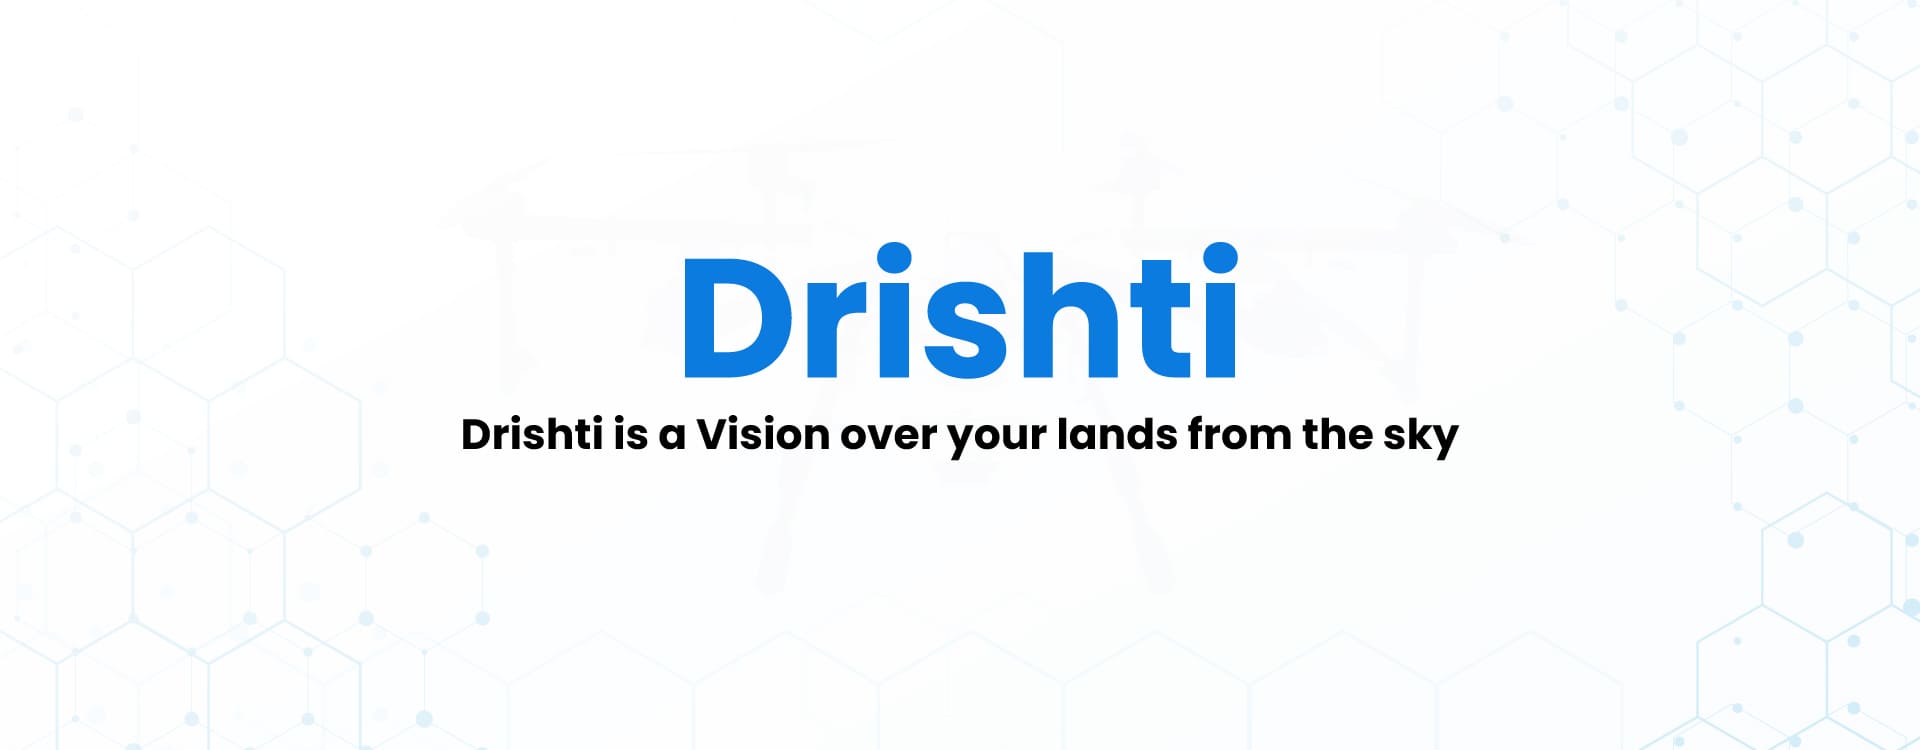 Drishti is a vision over your lands from the sky